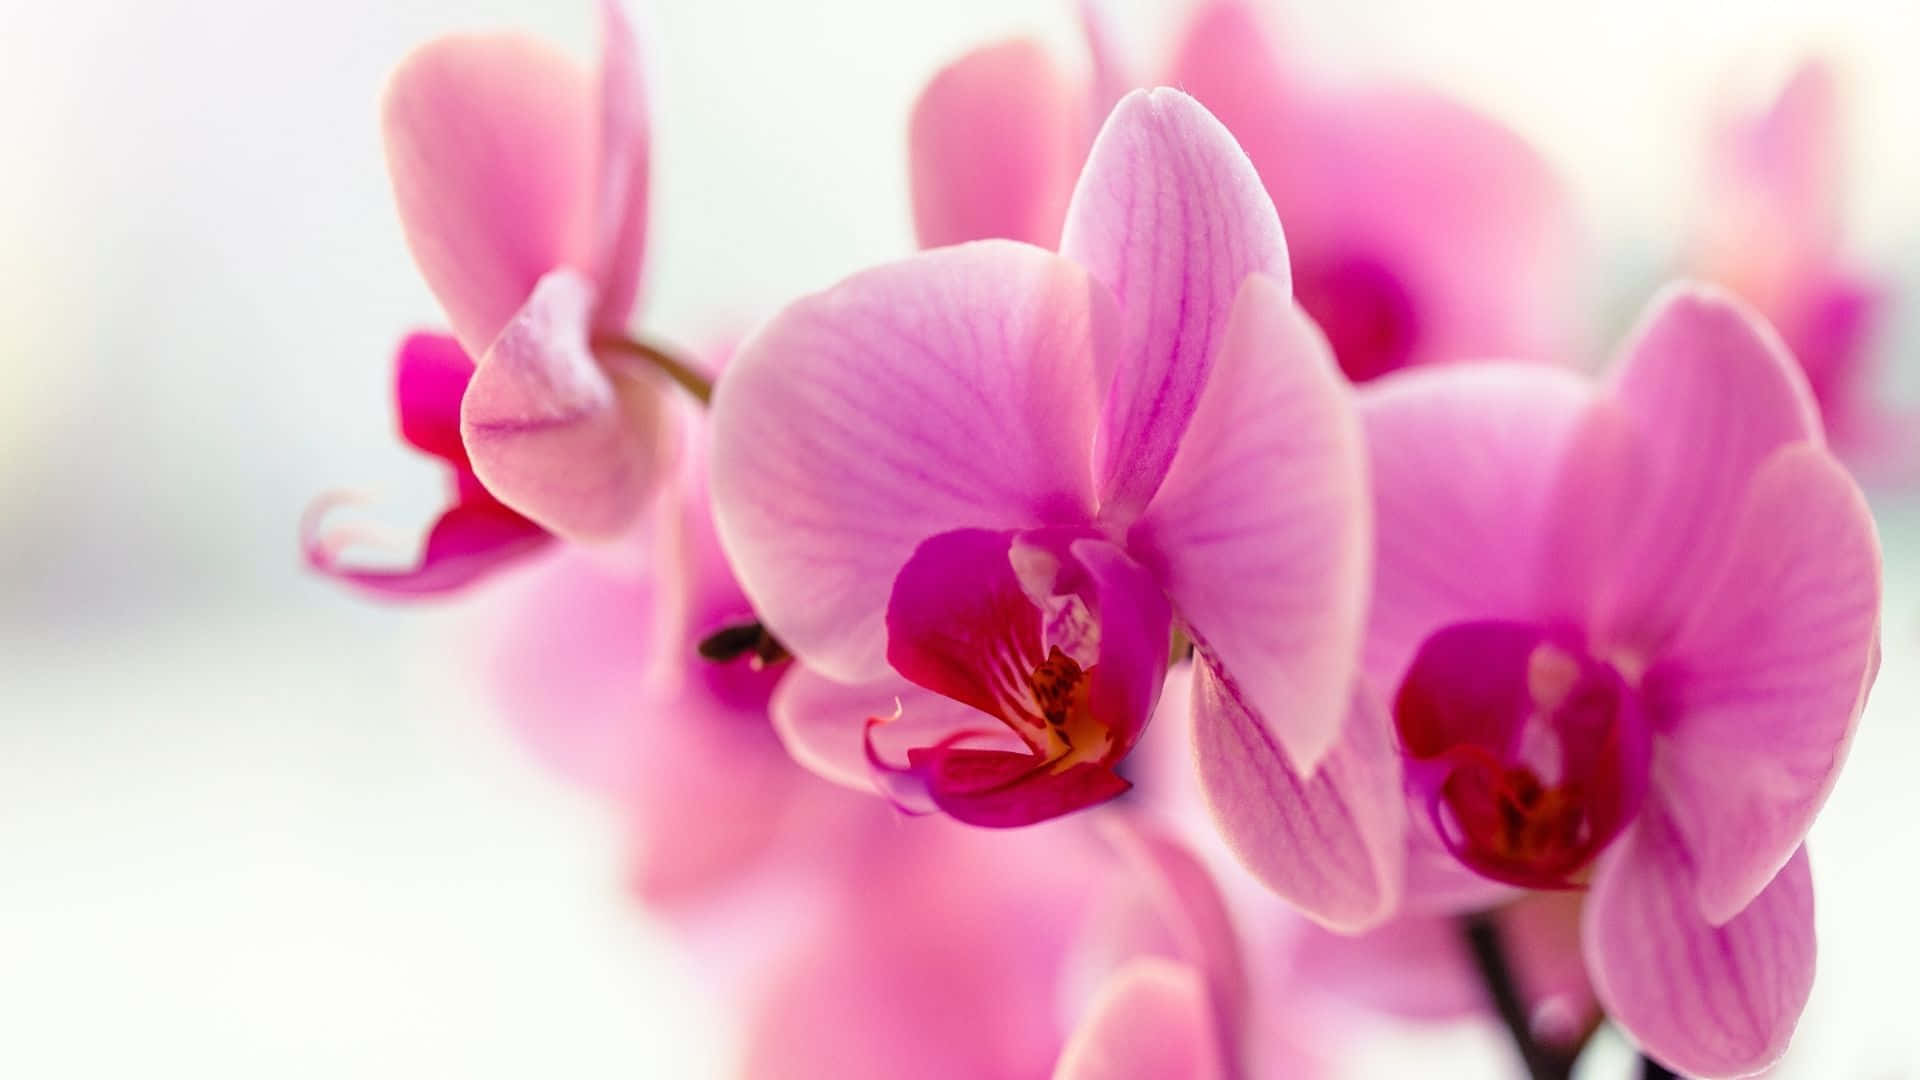 Rare Orchid Beautiful Flowers Pictures 1920 x 1080 Picture